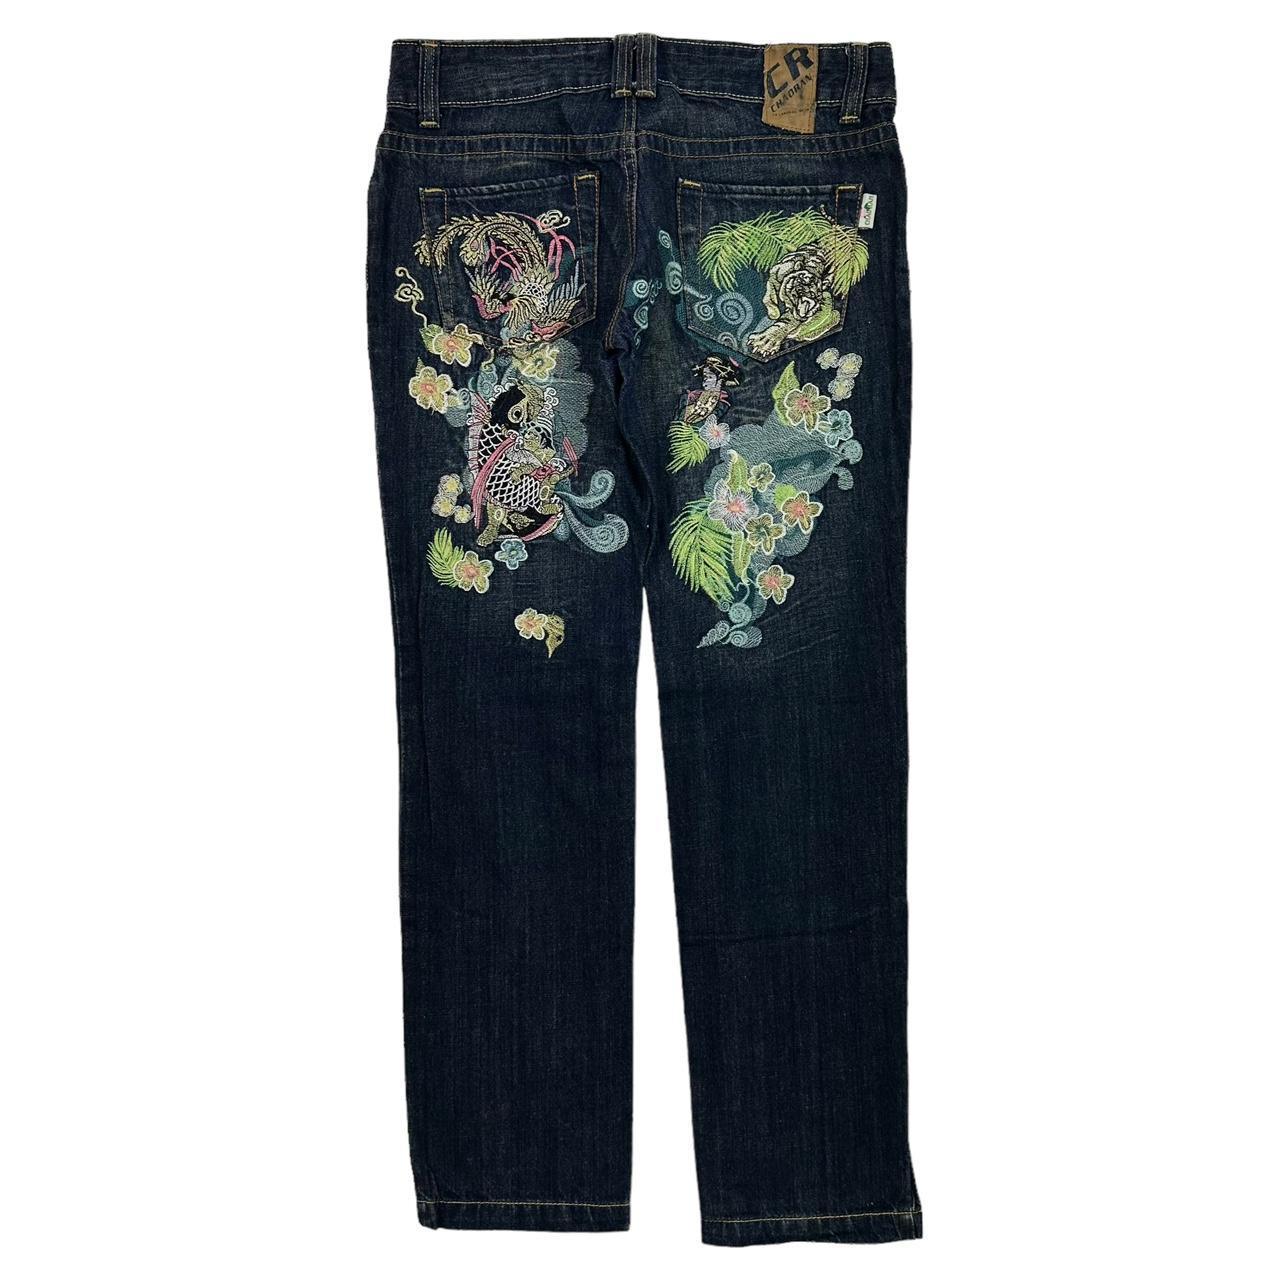 Vintage Tiger and leaves Japanese denim jeans W33 - Known Source